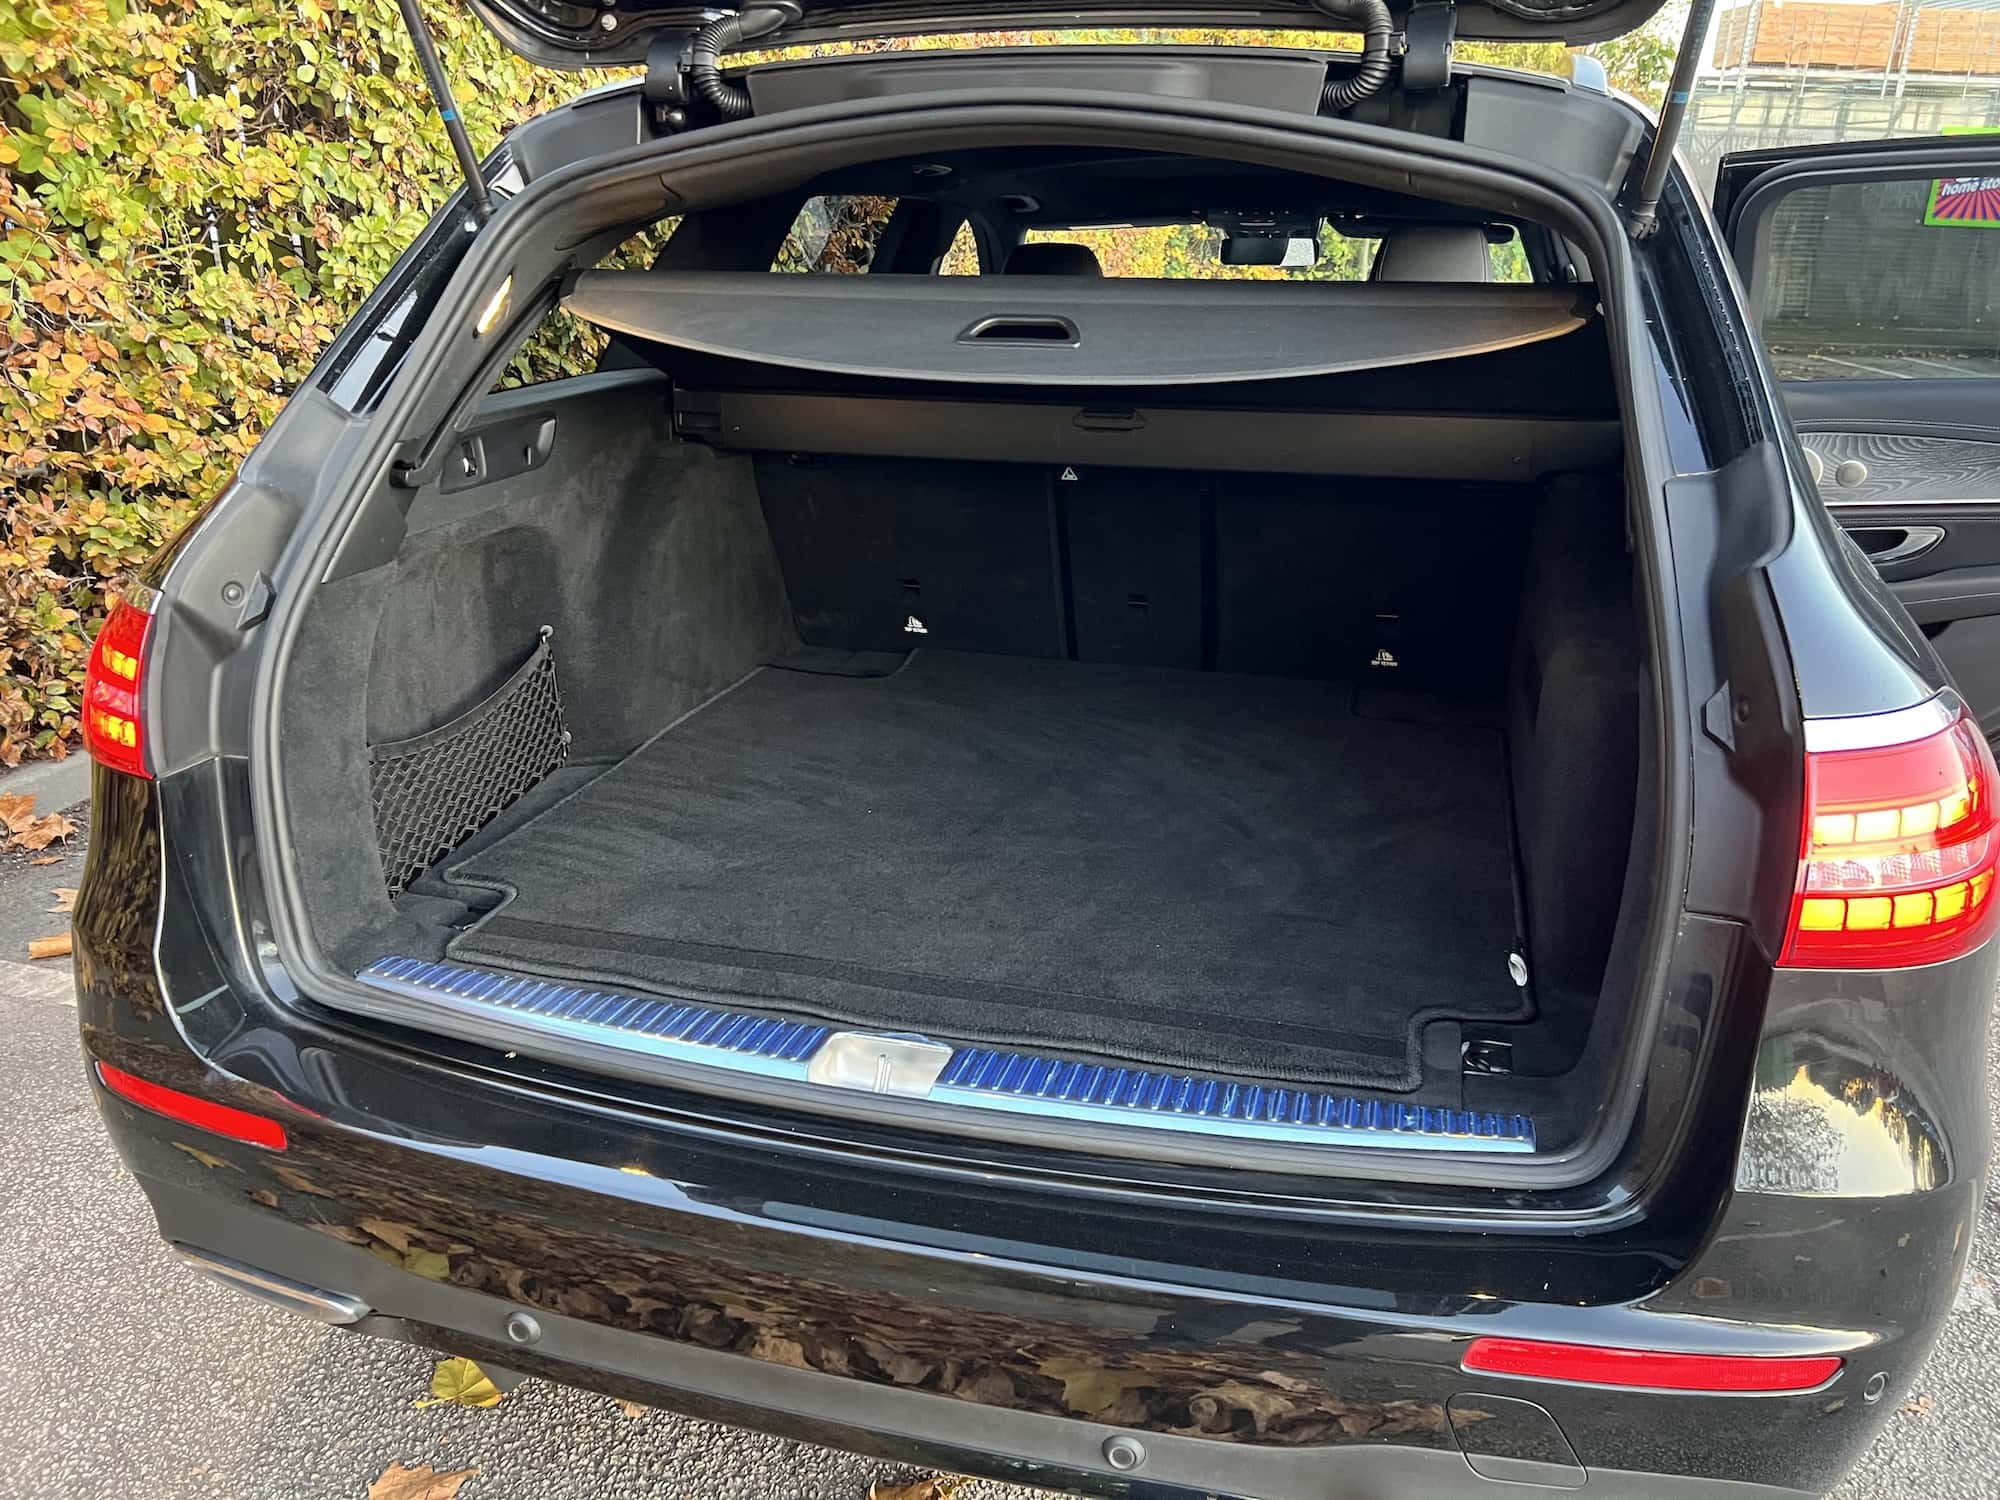 Mercedes E Class Boot luggage space